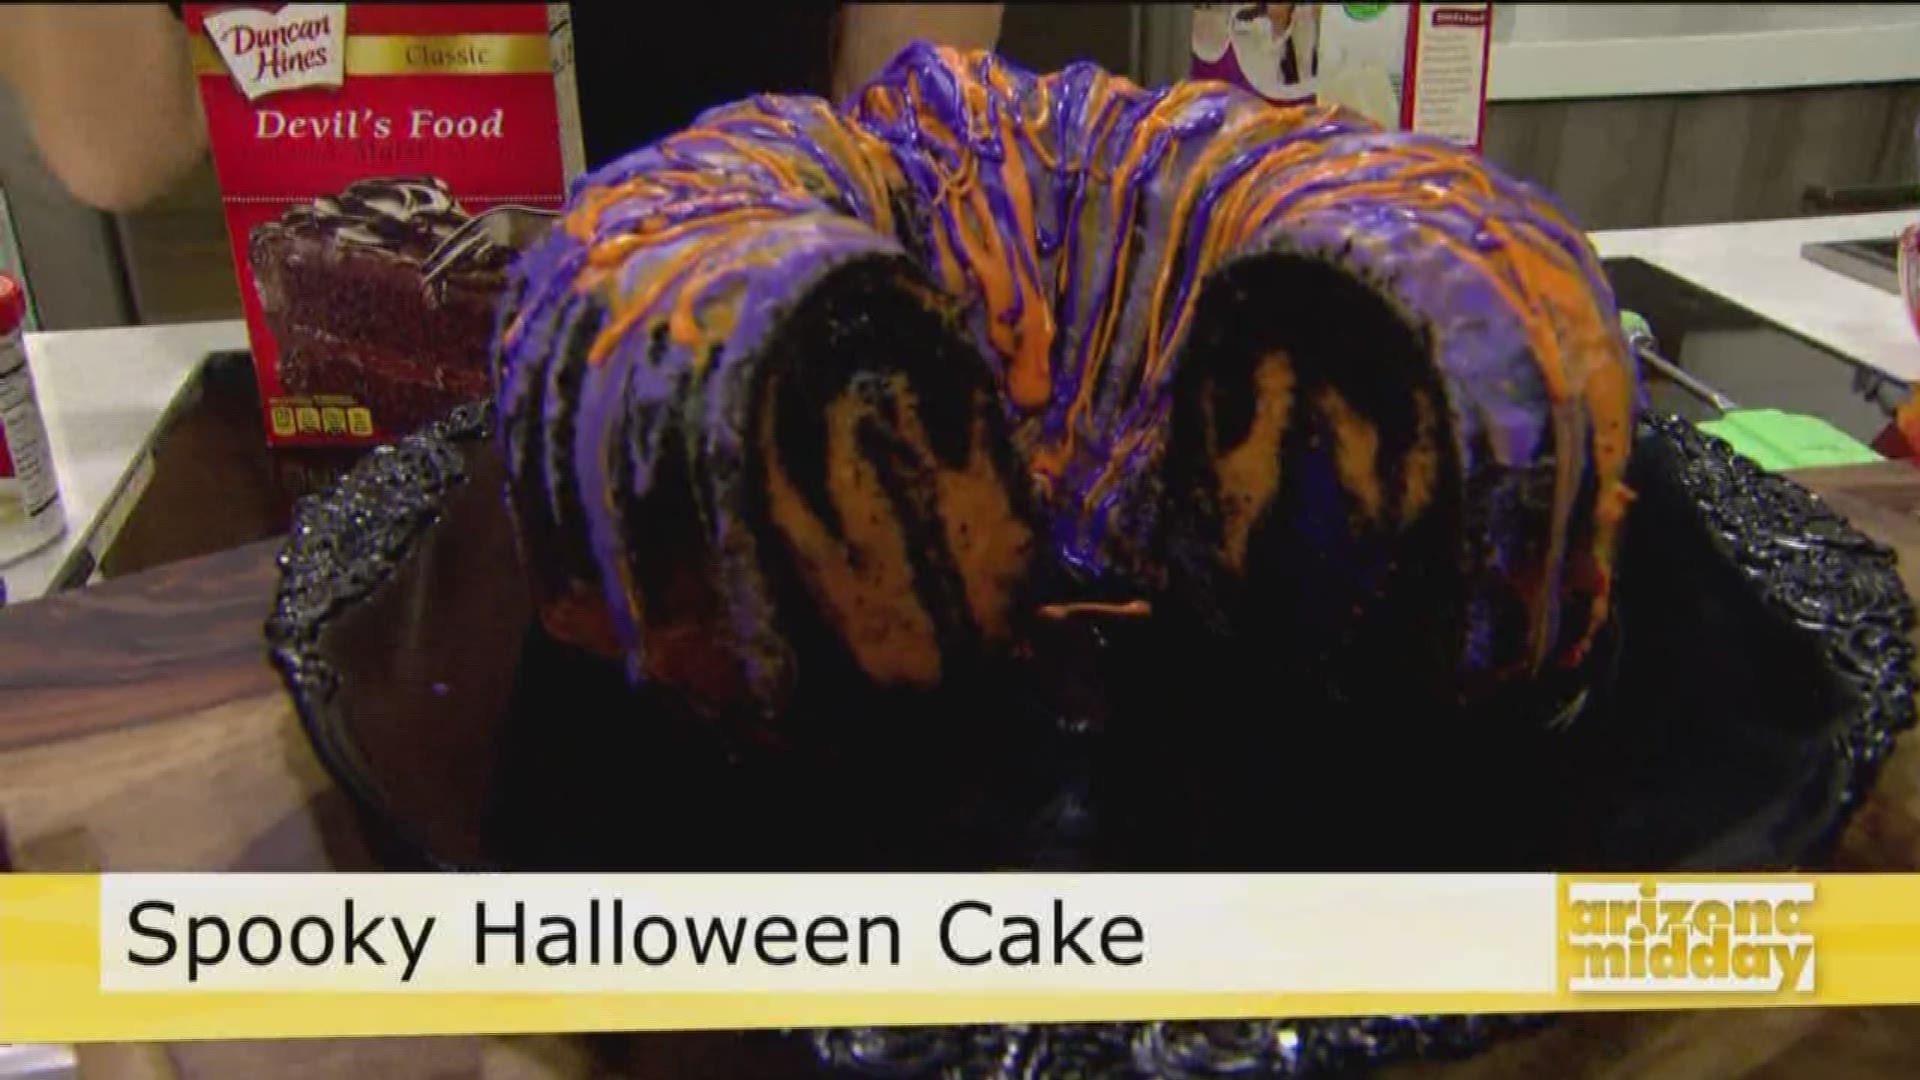 Jan shows us how to create a festive cake perfect for any Halloween celebration.